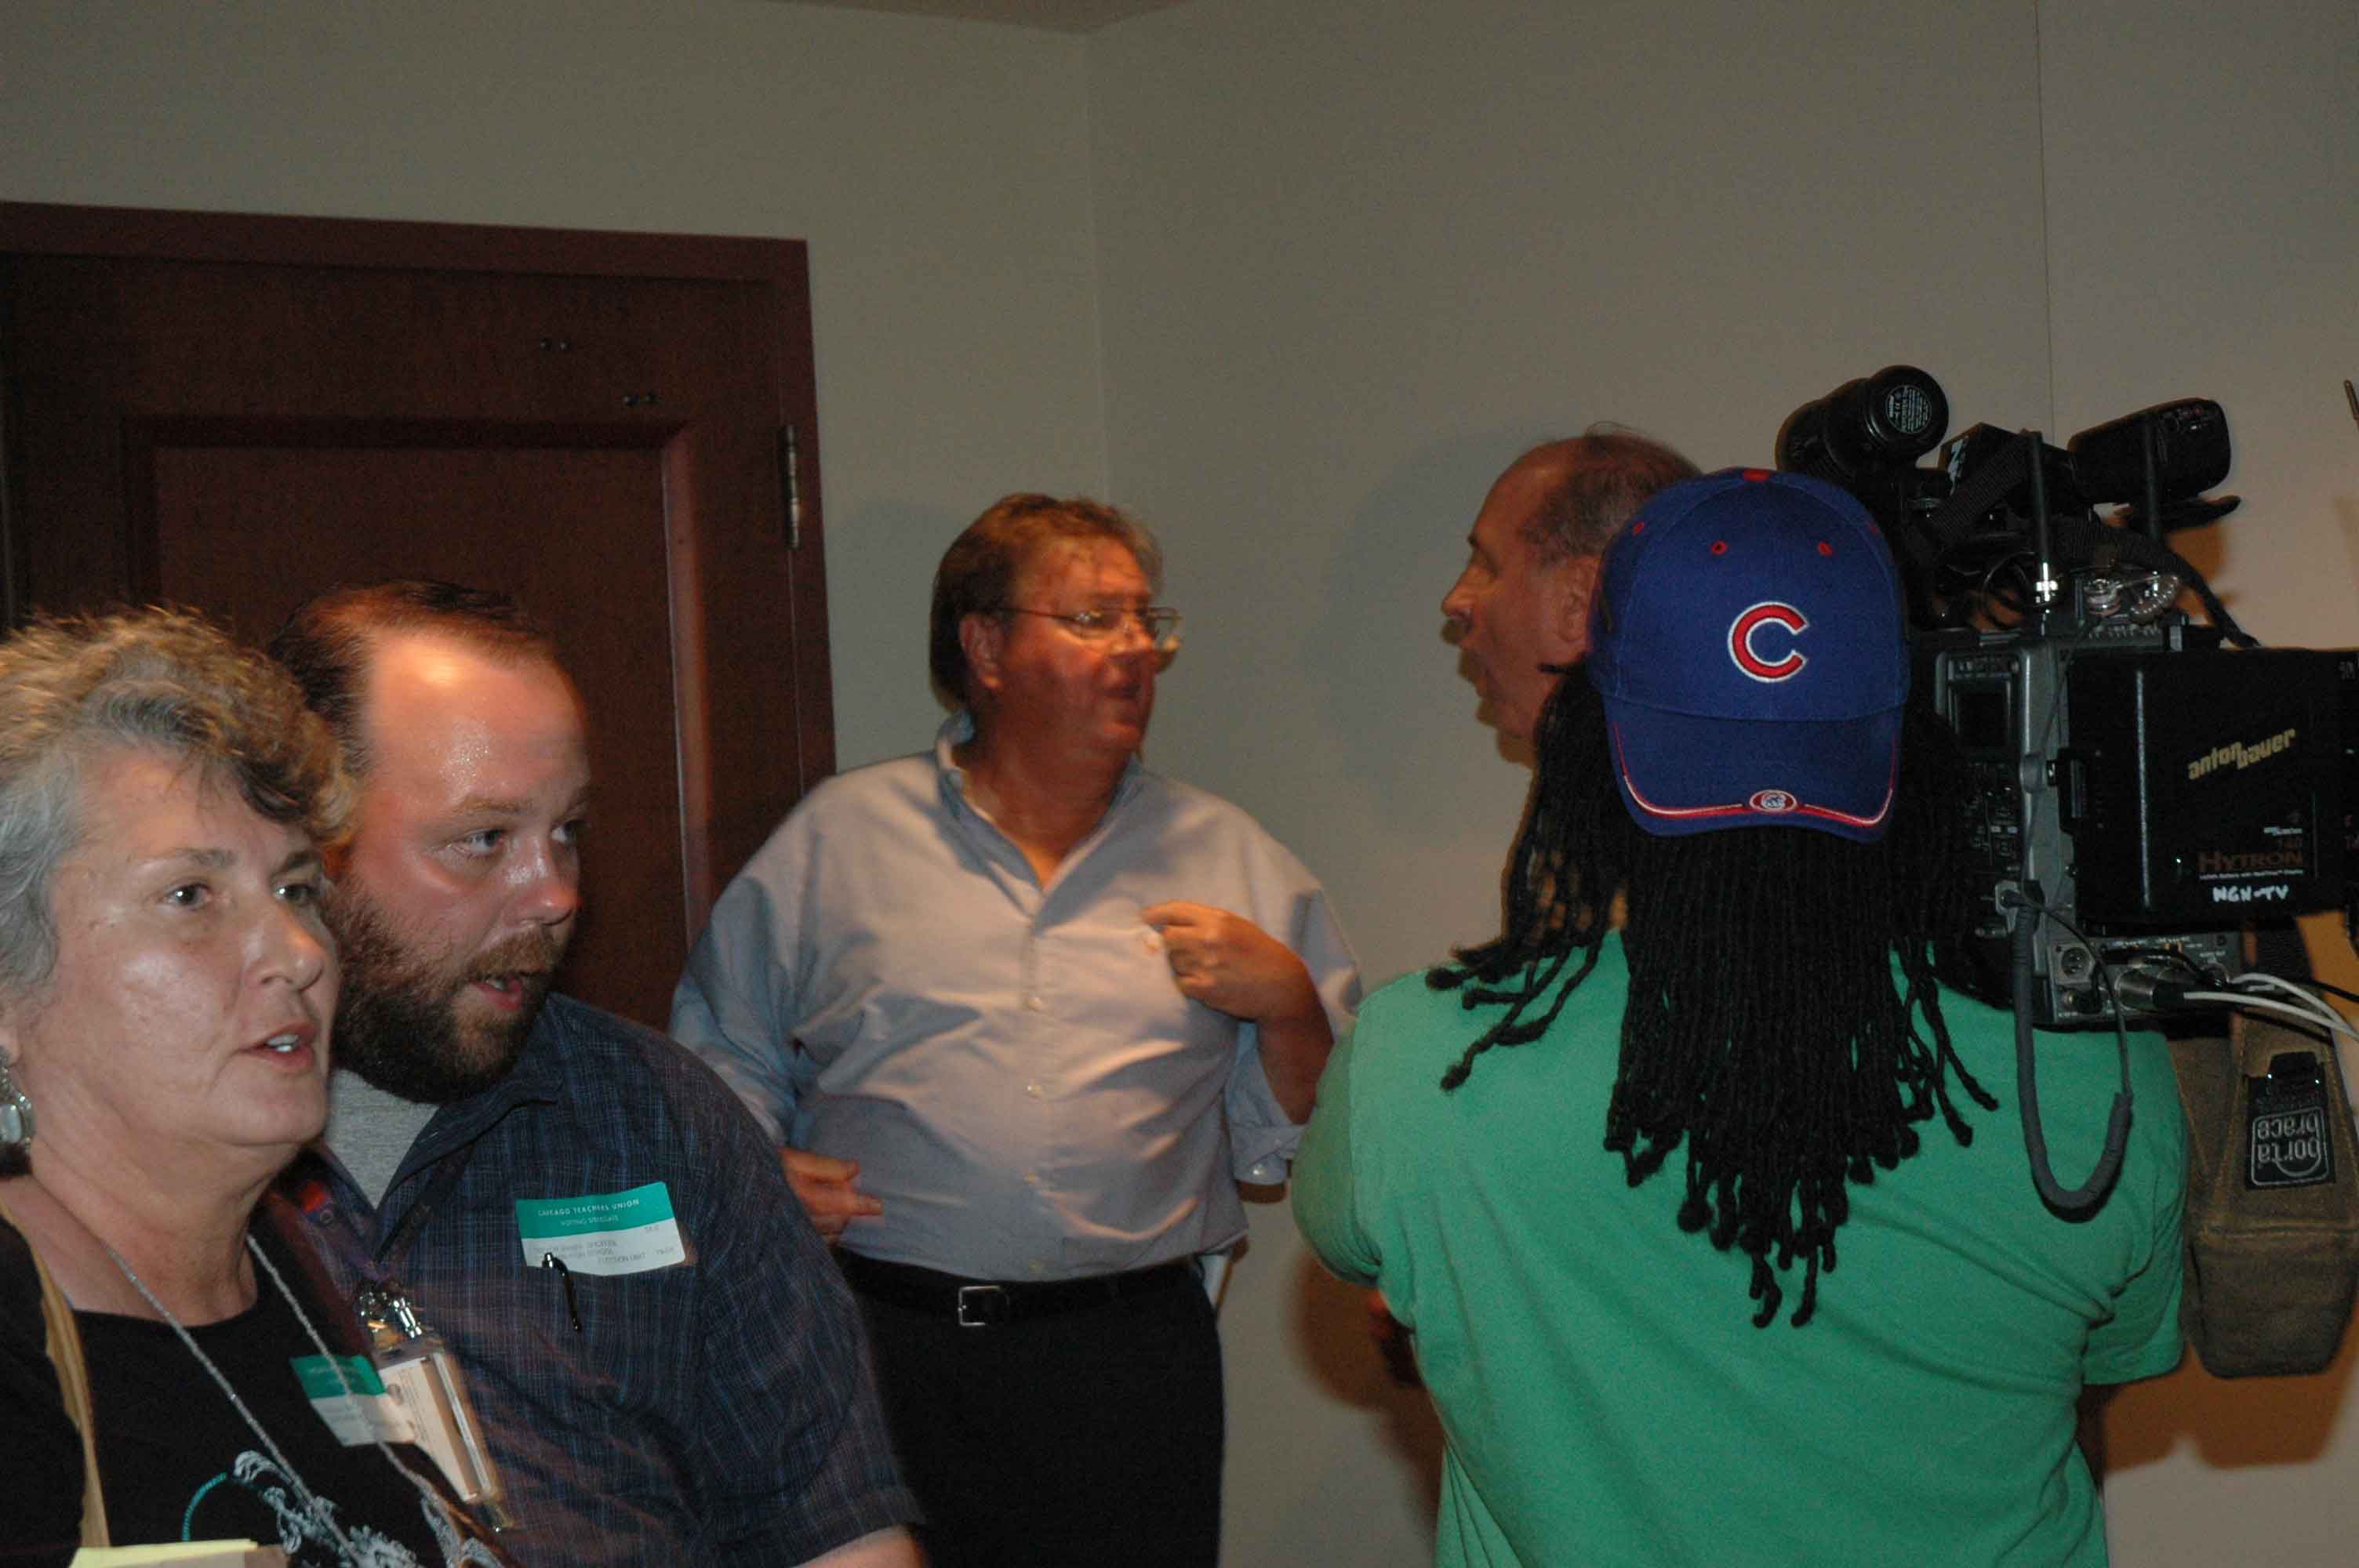 August 31, 2007. While TV cameras rolled, CTU attorney Lawrence Poltrock (center) argued with Roosevelt High School delegate Bill Malugen (partly obscured by camera) during the protests at Plumber’s Hall after the “vote” on the proposed contract brought in by Marilyn Stewart. Some observers at the time thought the two were about to come to blows. Poltrock’s law partner, his daughter Jennifer Poltrock, had served as “parliamentarian” at the raucous union meeting, which was convened on the Friday of Labor Day weekend to review Stewart’s contract proposal, and the big question before the city was whether the teachers were going to go on strike. By halfway through the meeting, the majority of the delegates were either skeptical about the Stewart proposal or opposed to it. Instead of allowing the delegates to ask questions and debate the contract for as long as necessary, Stewart claimed that the meeting had to clear the hall early. When the vote was finally called, Stewart called for the “Yes” votes. Then — despite an outcry from the delegates — she refused to call for the “No” votes and refused to heed calls for a count of the vote. At that point, Stewart simply ruled “The Ayes have it.” It was the first time in history that a vote of the House of Delegates on a CTU contract was not done by counting both the “Yes” and “No” votes. Jennifer Poltrock quickly claimed that Stewart didn’t have to count the “No” votes. Almost as quickly, Stewart disappeared. Stewart and the union officers went downstairs through a back door for a press conference. There, they tried to tell the media that the union delegates supported the contract, when in fact there had been no “No” votes allowed. Most of the delegates believed that had the “No” votes been taken, the contract would have been defeated. Stewart’s press conference was interrupted by chants of “No! No! No!” from hundreds of delegates who refused to leave the building. The delegates assembled outside the door of the press conference (doors behind Poltrock, above). The reporters who had been taking notes on what Marilyn Stewart was saying slowly left the room — despite attempts by CTU security to block the door — and covered the story among the mass of delegates chanting in opposition to the proposed contract. Substance photo by George N. Schmidt